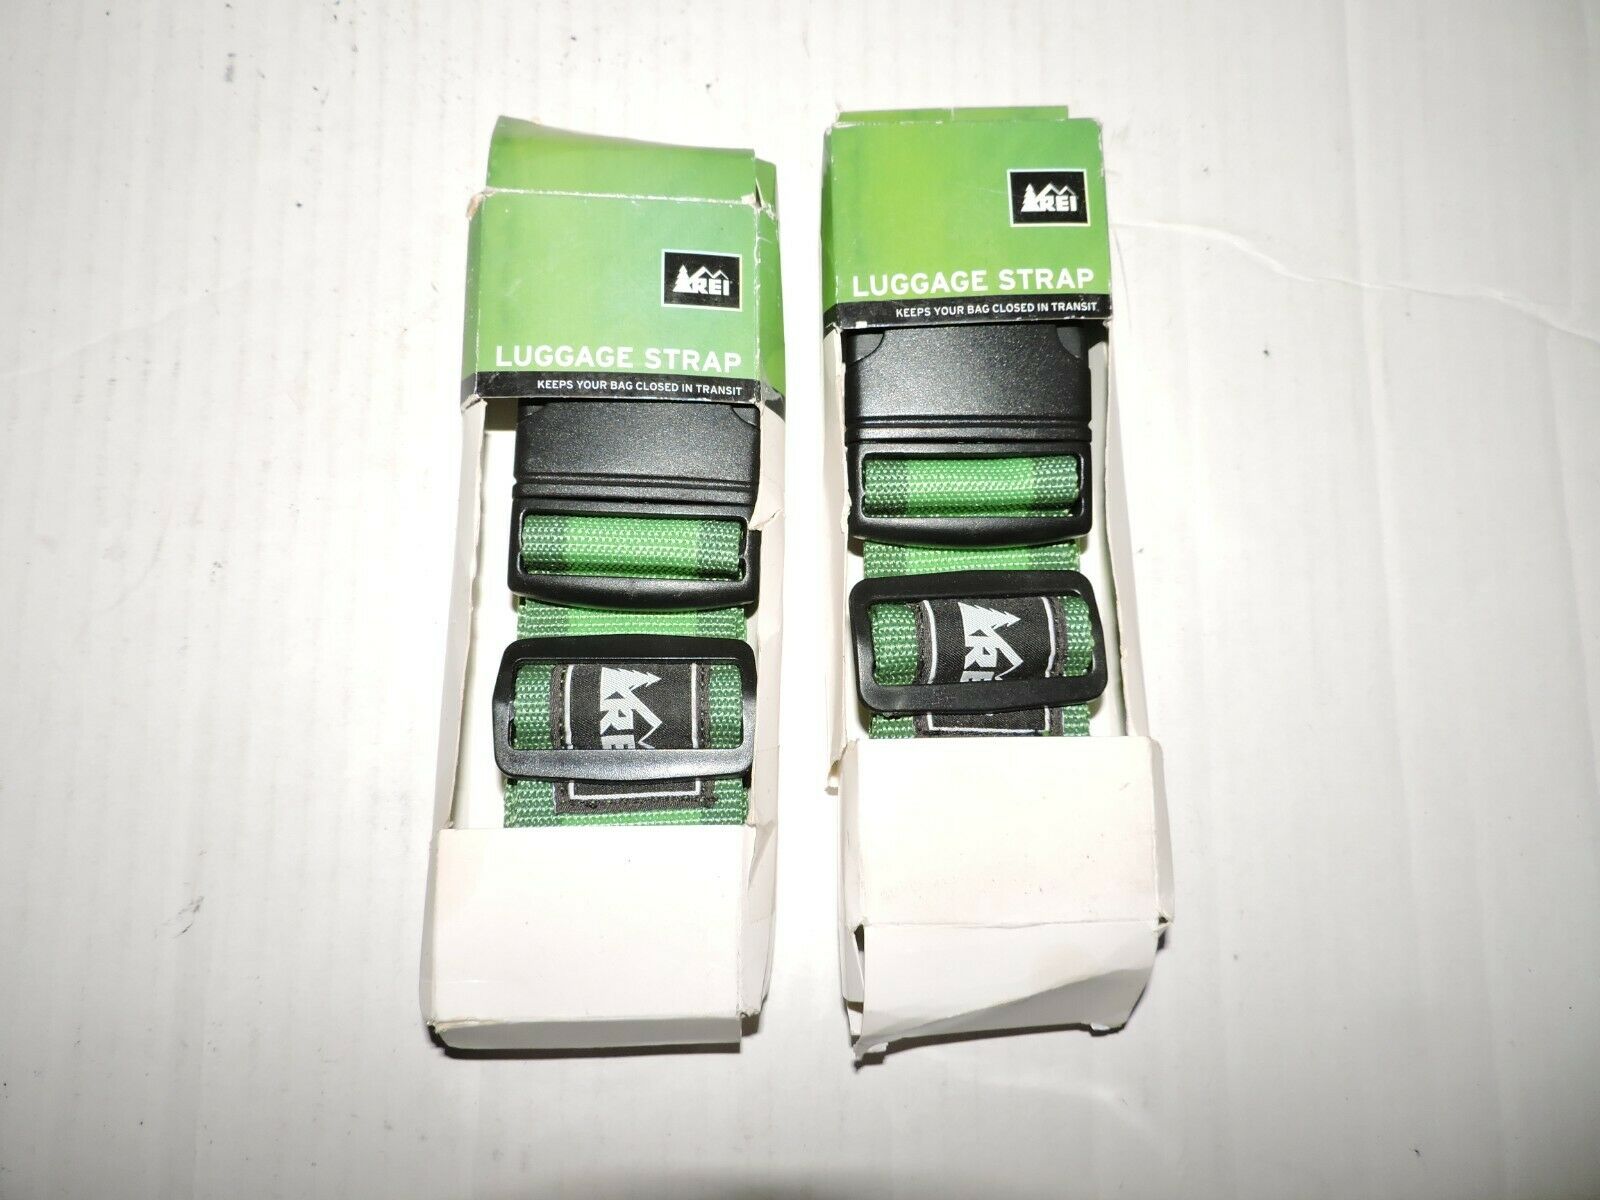 Rei Luggage Strap / Keep Bag Closed In Transit  Adjusts From 44" To 80" Lot Of 2